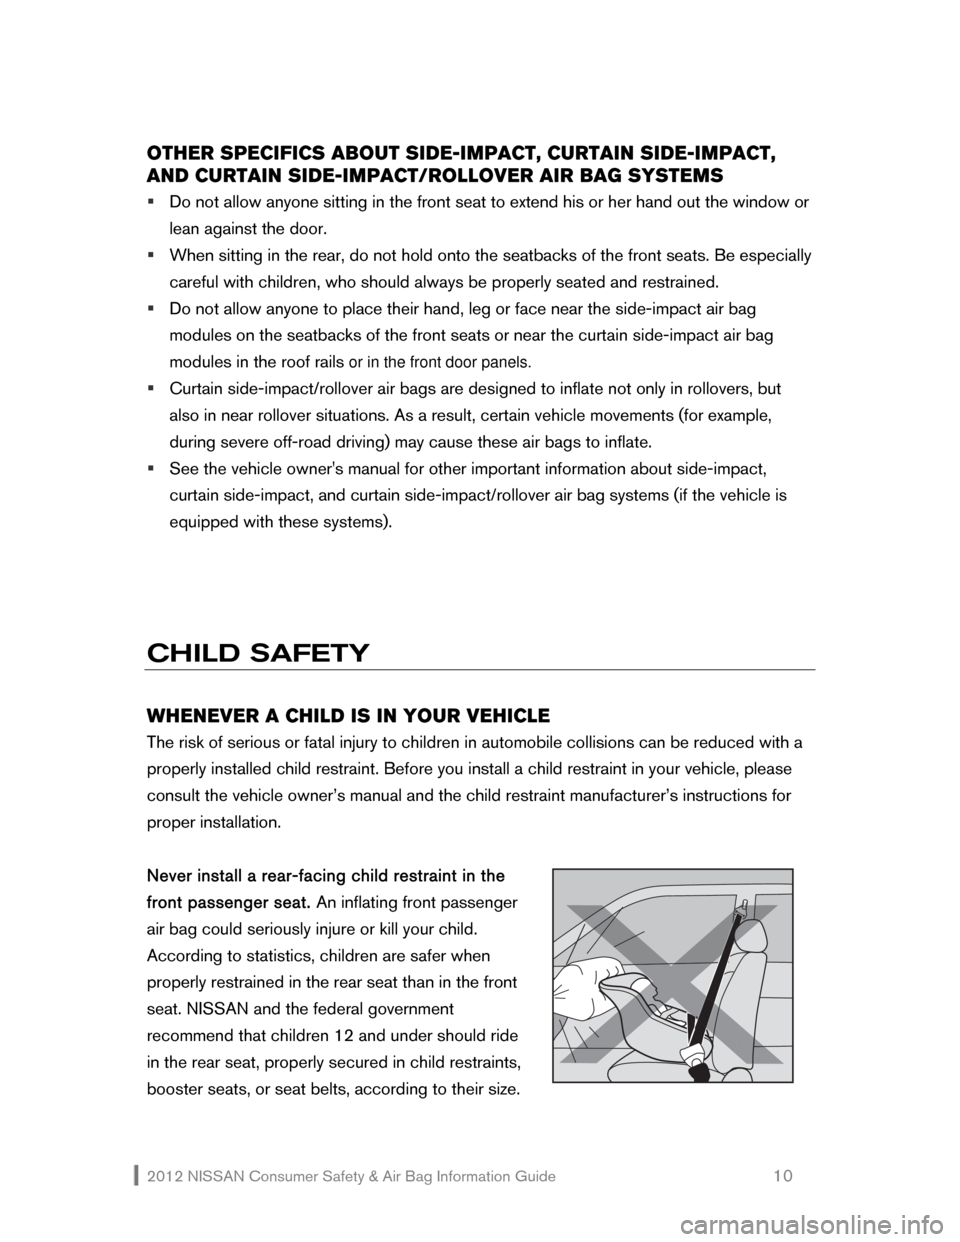 NISSAN NV200 2012 1.G Consumer Safety Air Bag Information Guide 2012 NISSAN Consumer Safety & Air Bag Information Guide                                                   10 
OTHER SPECIFICS ABOUT SIDE-IMPACT, CURTAIN SIDE-IMPACT, 
AND CURTAIN SIDE-IMPACT/ROLLOVER 